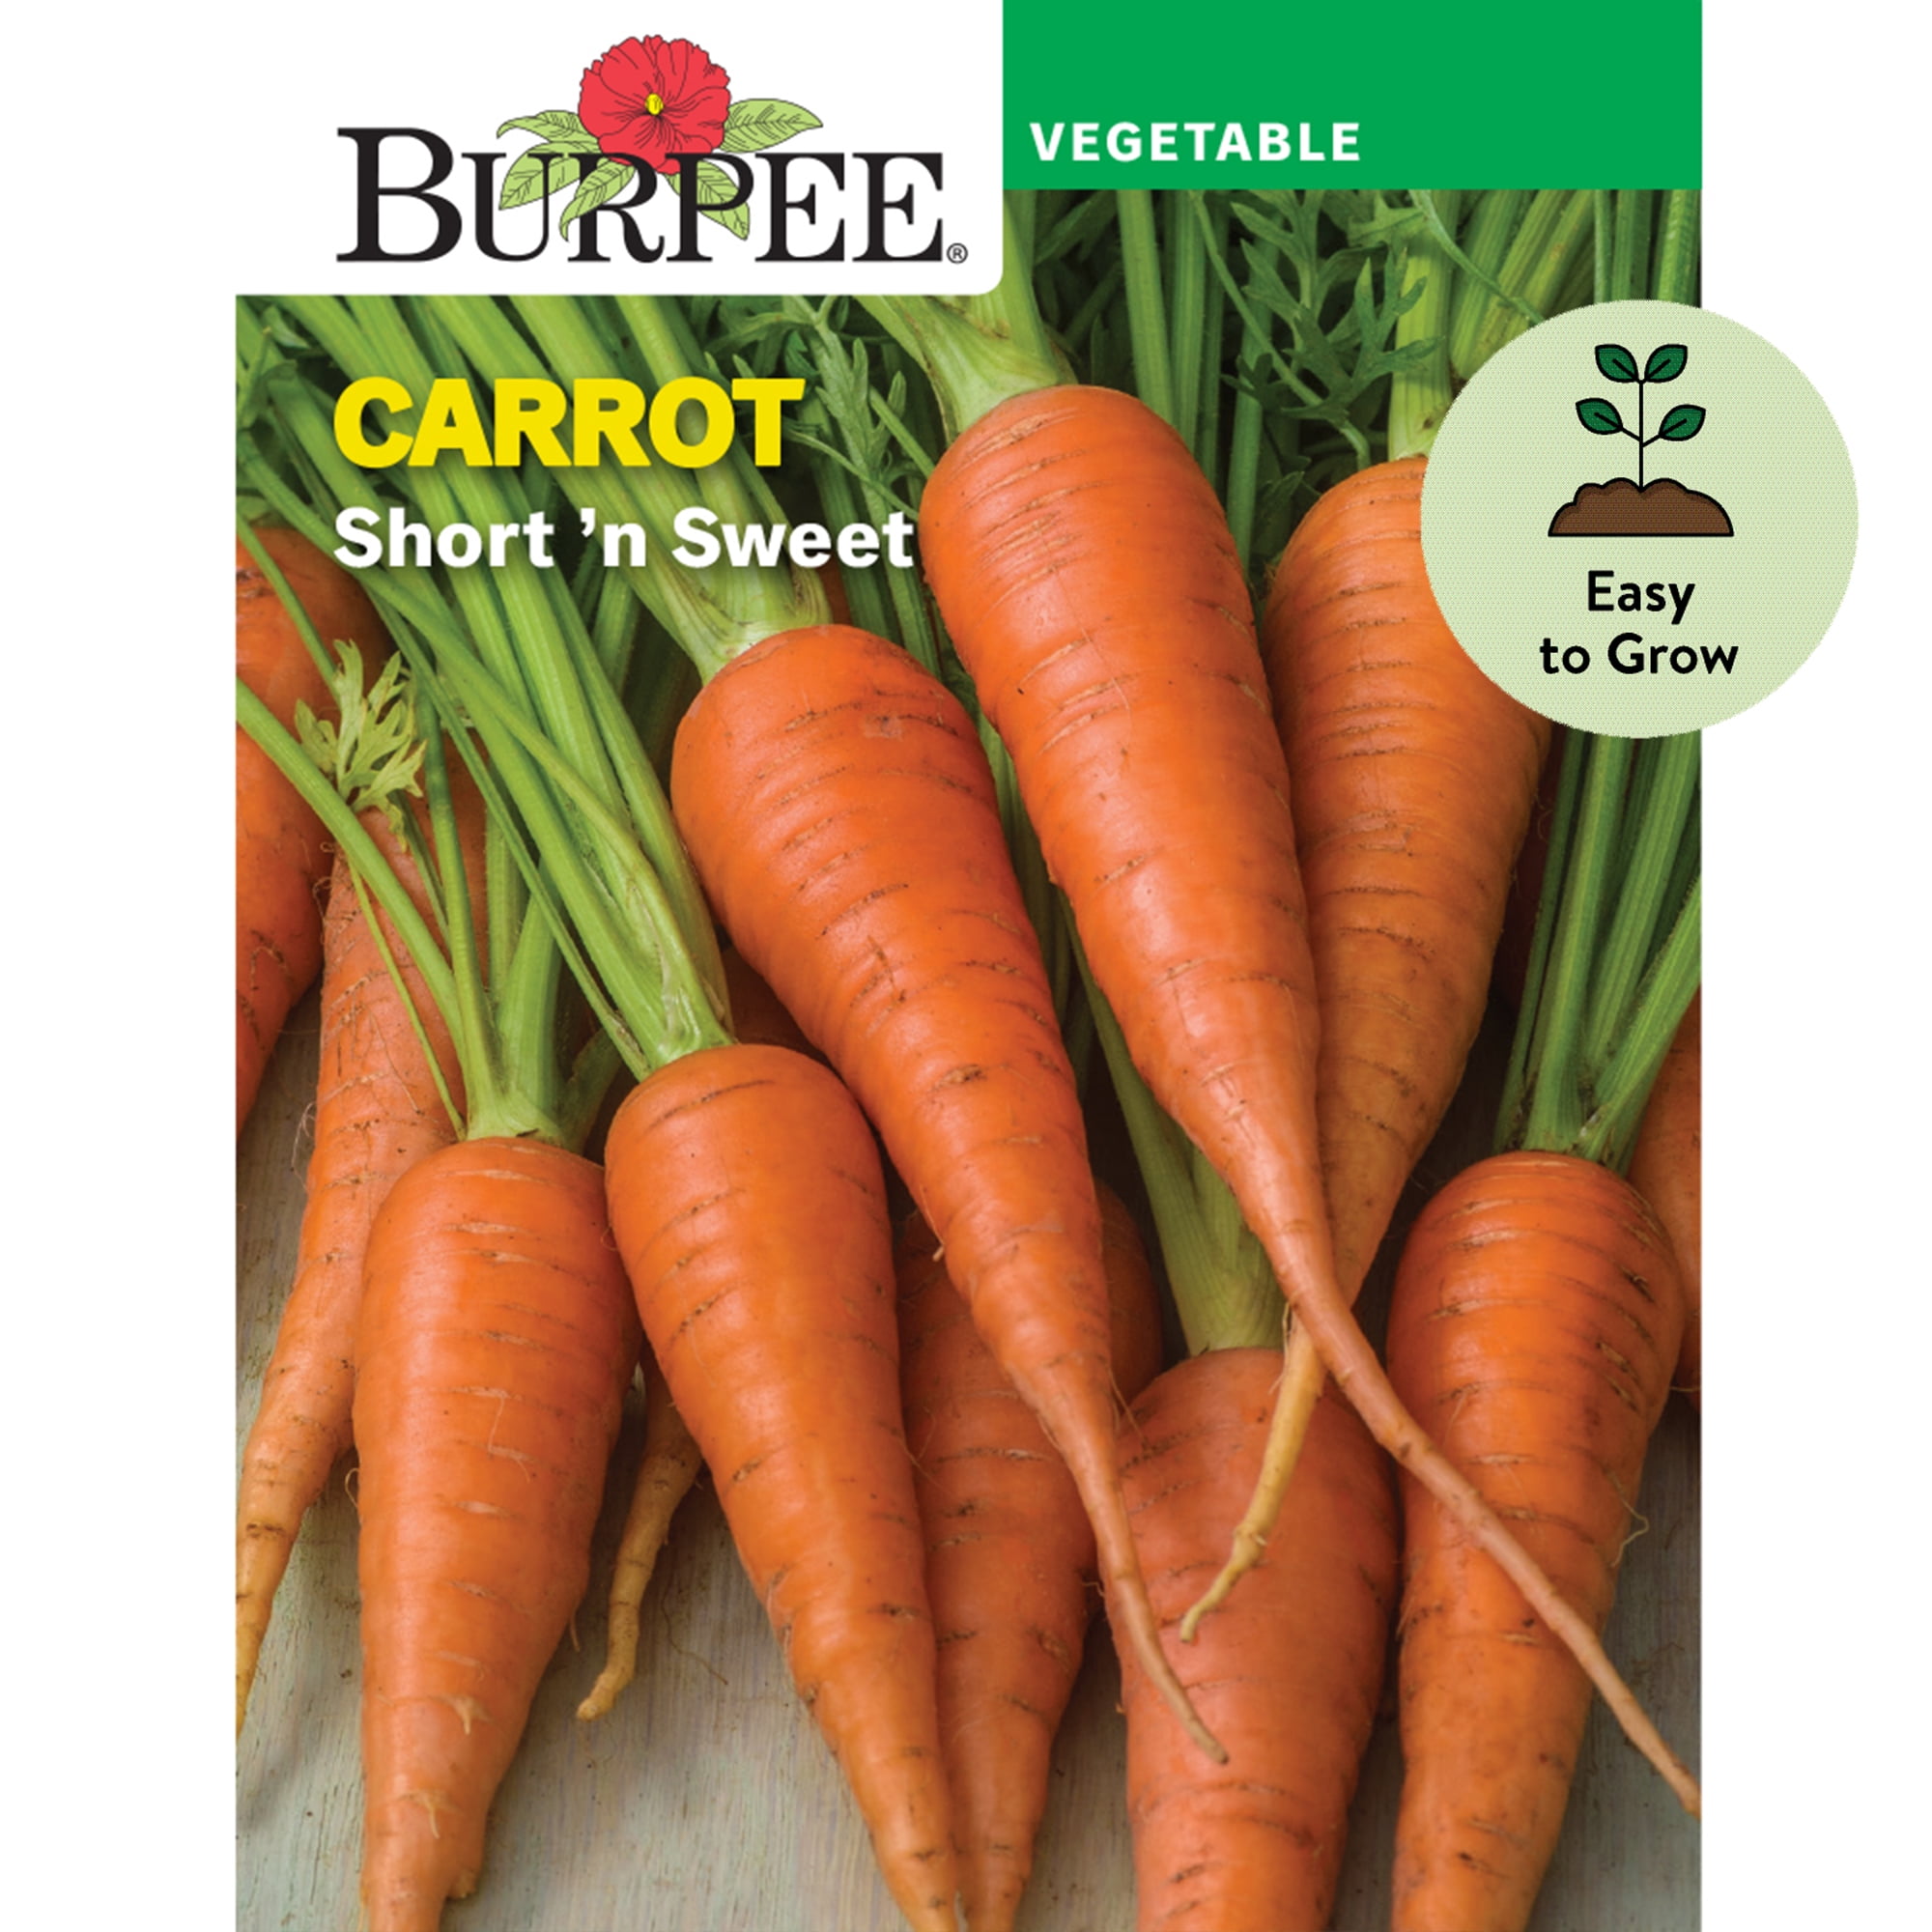 Burpee Short 'N Sweet Carrot Seeds - Non-GMO, Easy to Grow, Vegetable ...